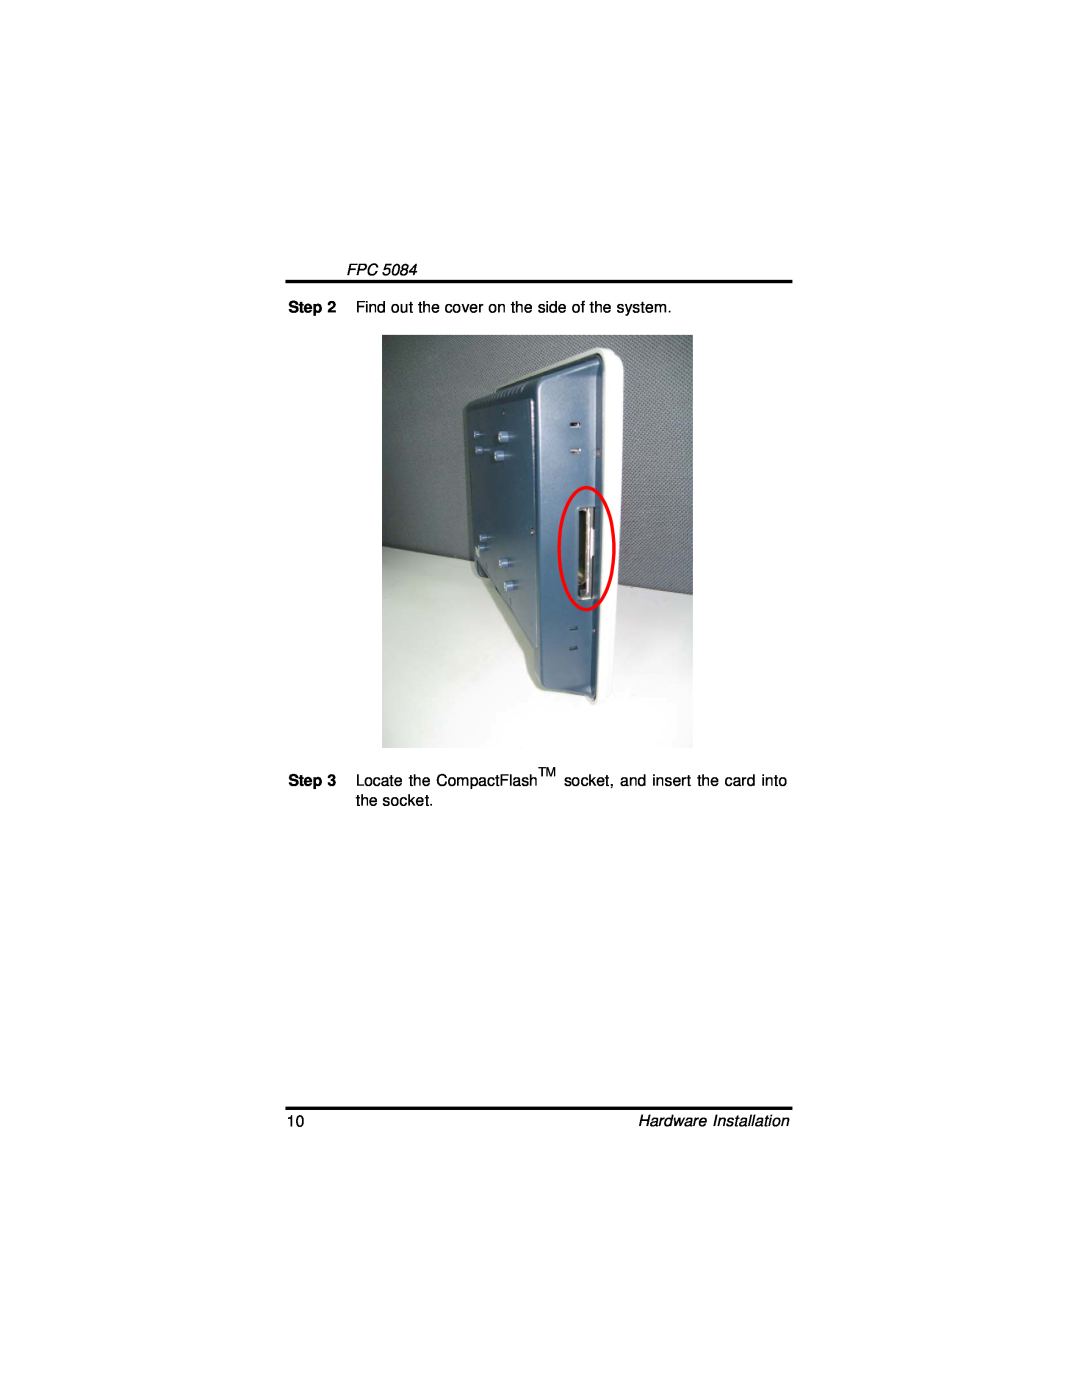 Intel FPC 5084, N270 user manual Find out the cover on the side of the system, Hardware Installation 